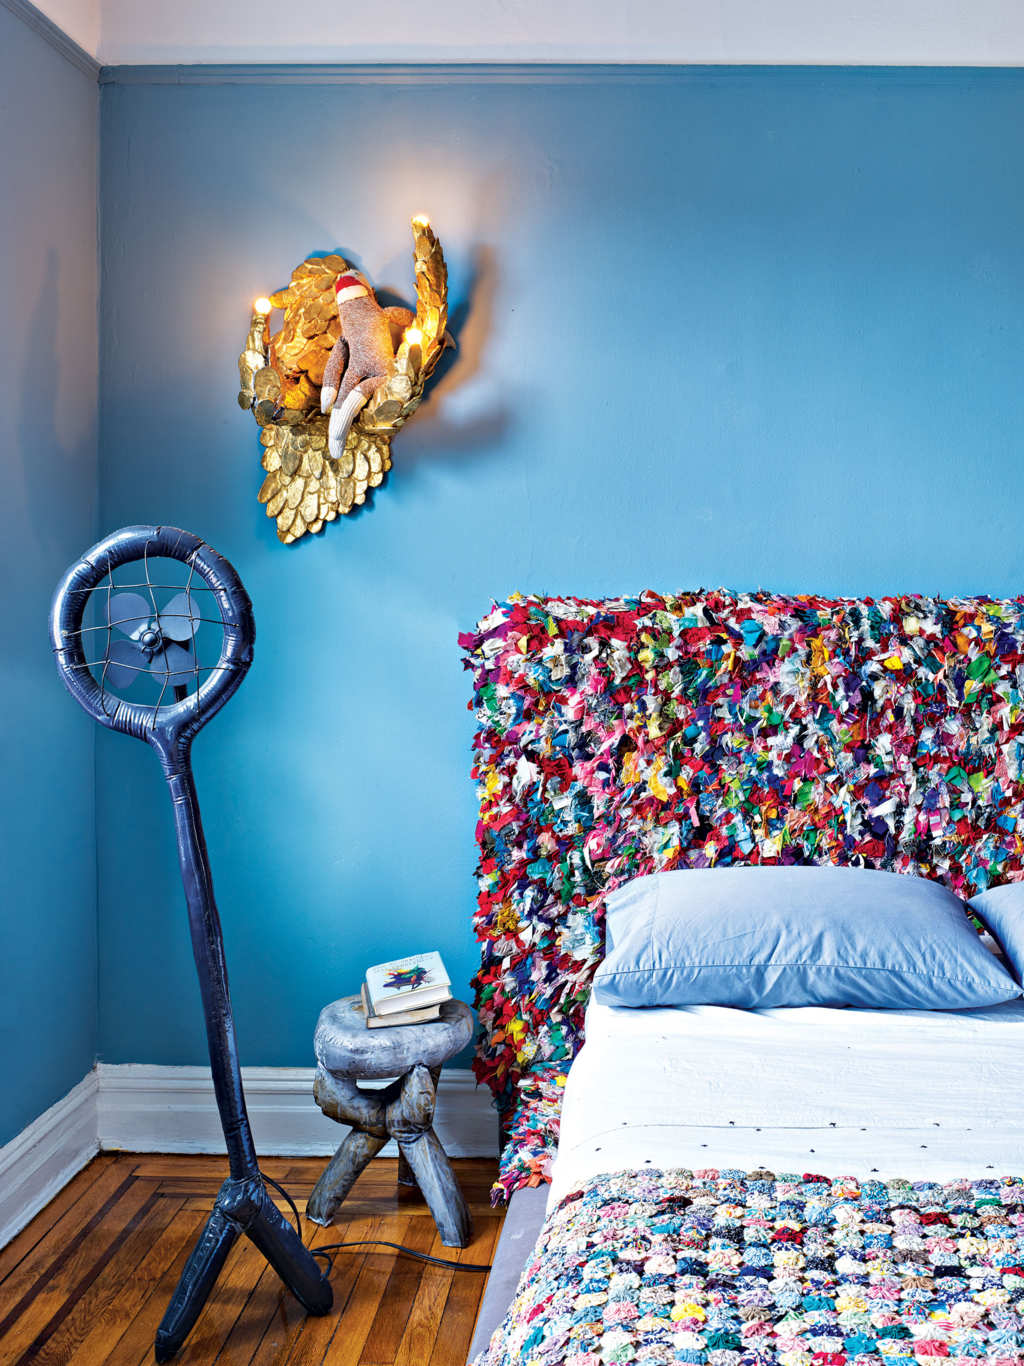 The master bedroom features a super colorful headboard and a matching bedspread, crazy furniture and lamps designed by the couple